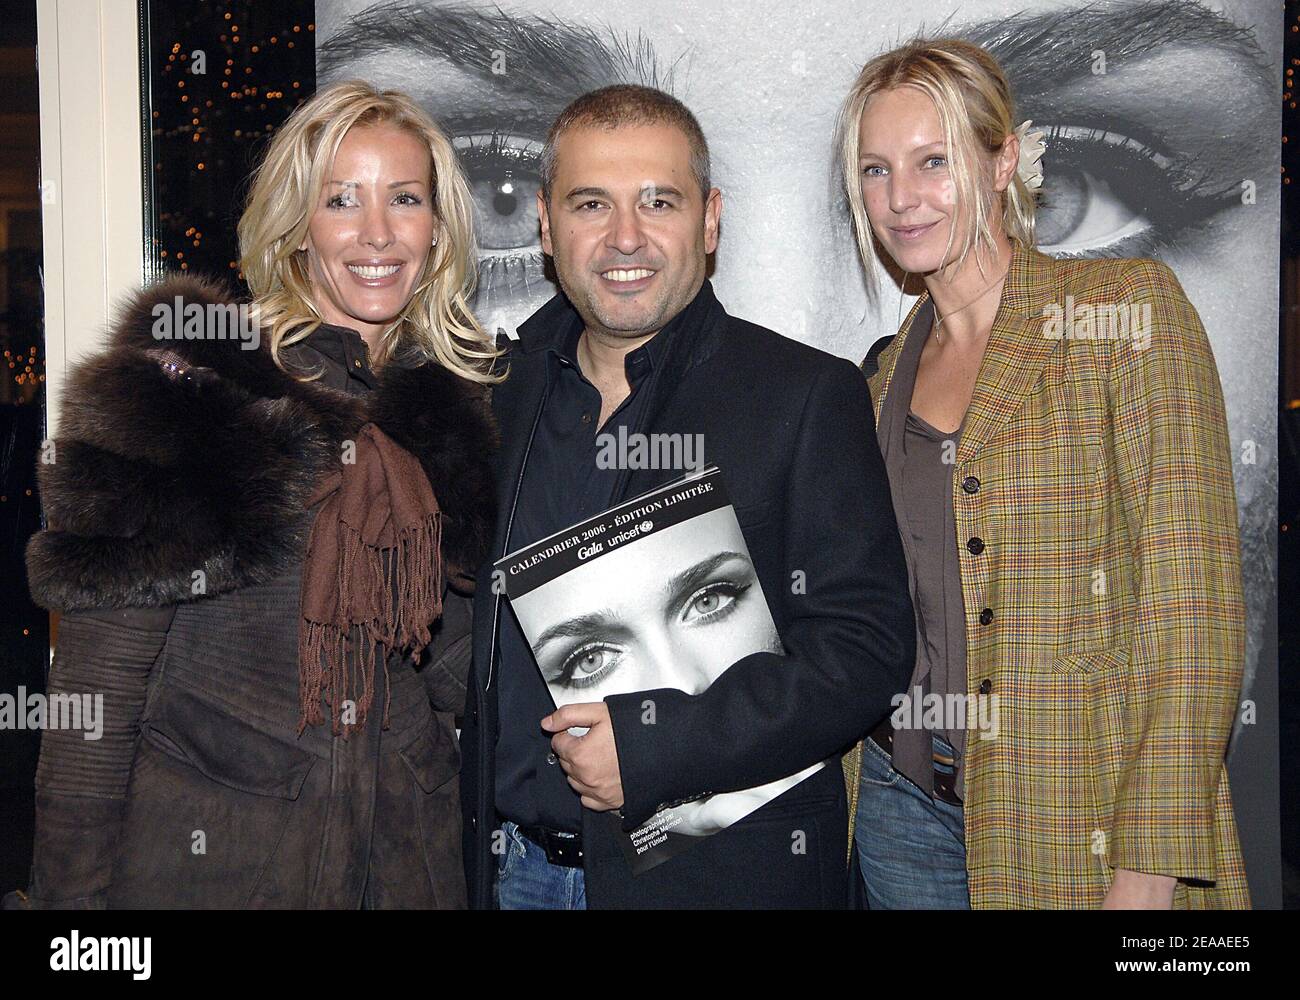 Agathe de La Fontaine and daughter Zoe at the launch party of UNICEF  calendar 2006, with picture of Diane Kruger, photographied by Christophe  Meimoon, held at the Bristol Hotel in Paris, France